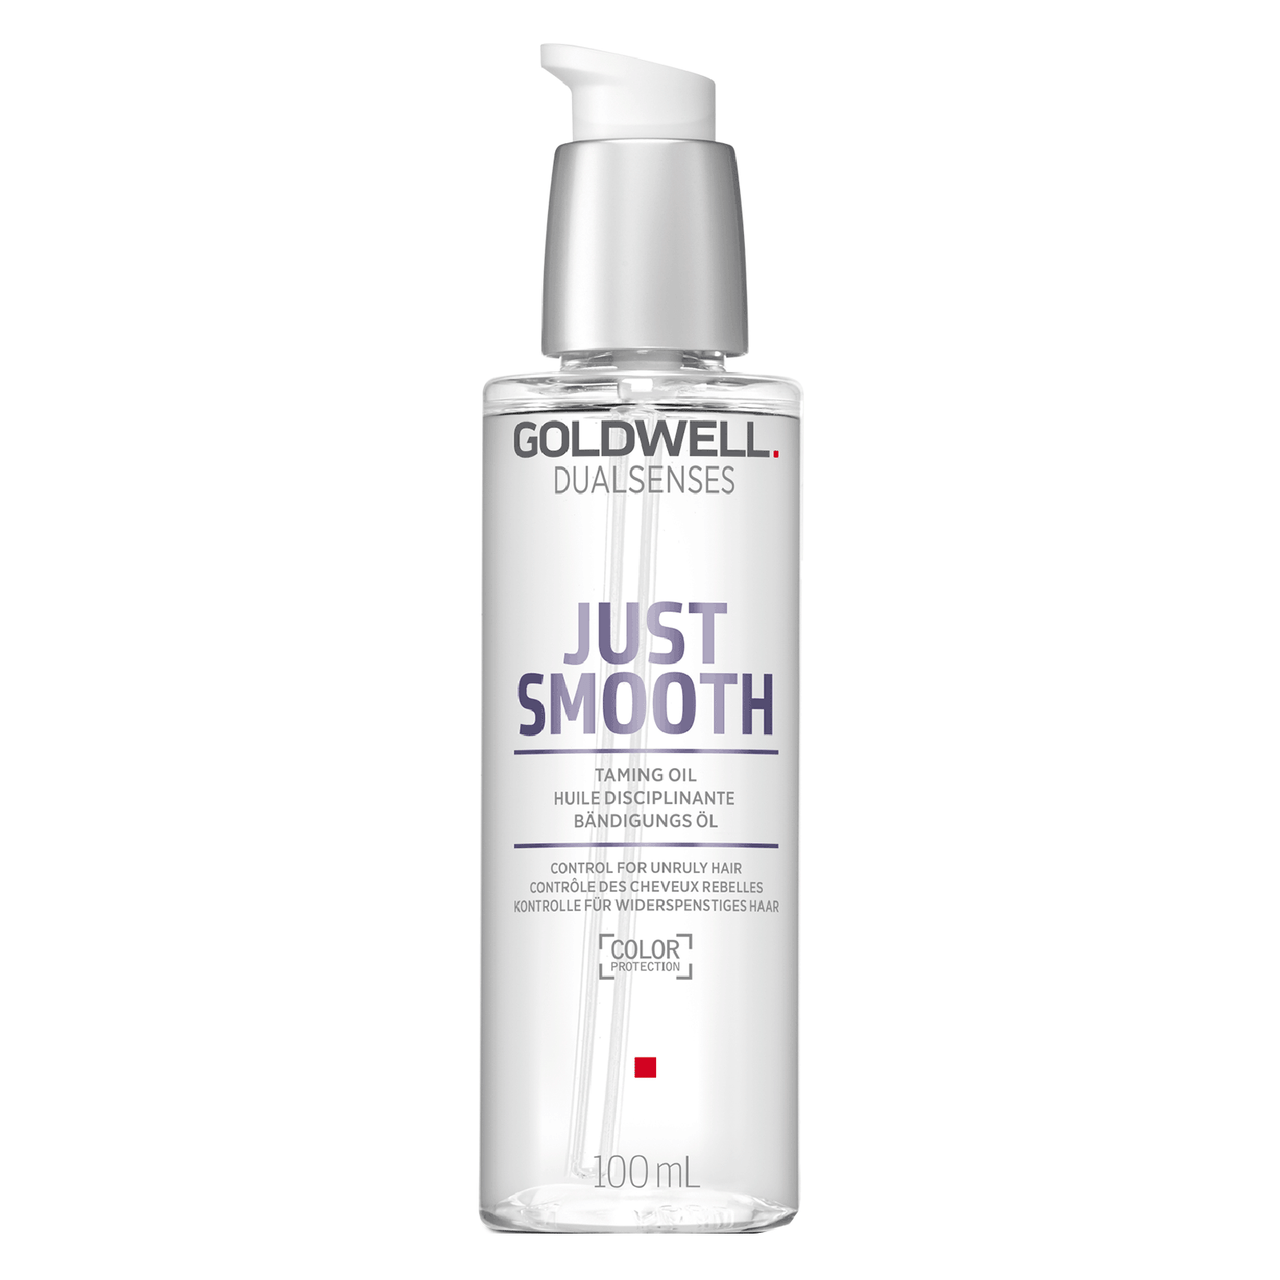 Goldwell  Dualsenses Just Smooth Taming Oil 3.3 fl. oz.